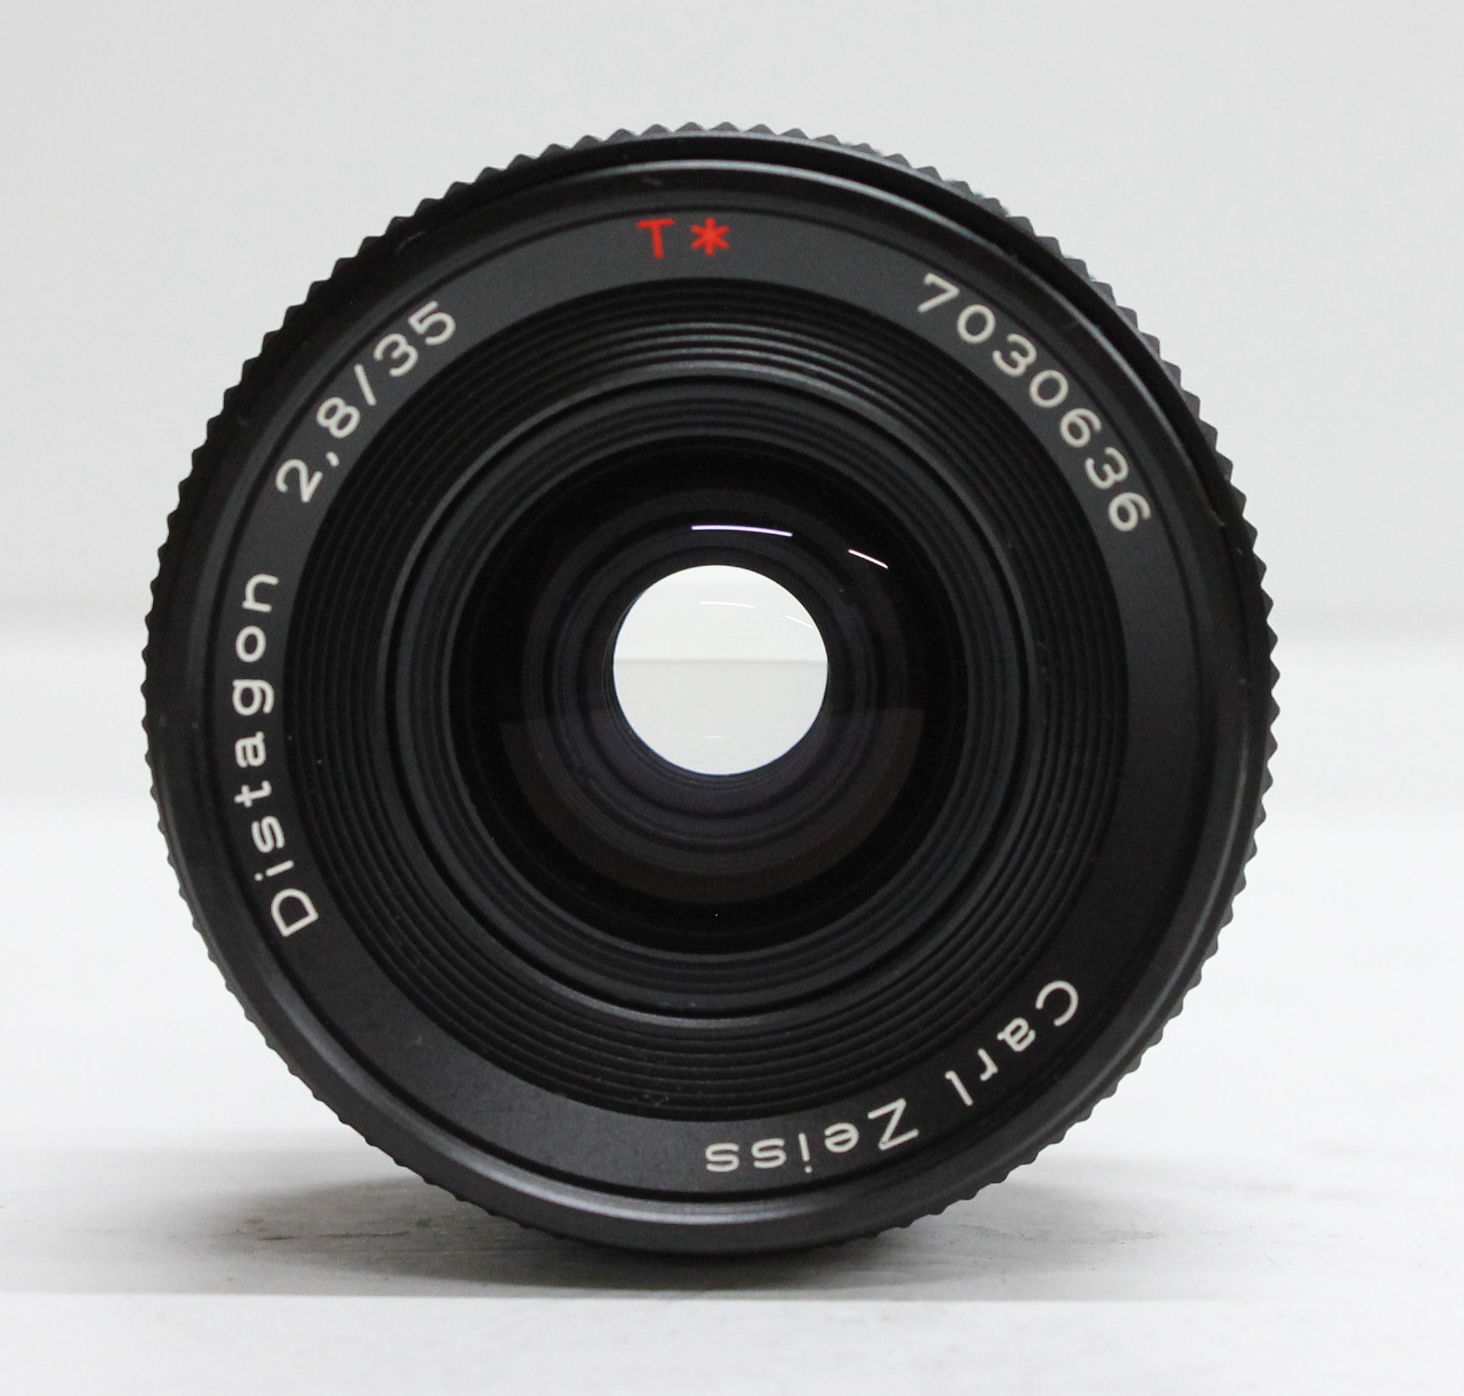  Contax Carl Zeiss Distagon T* 35mm F2.8 MMJ MF Lens from JAPAN Photo 1